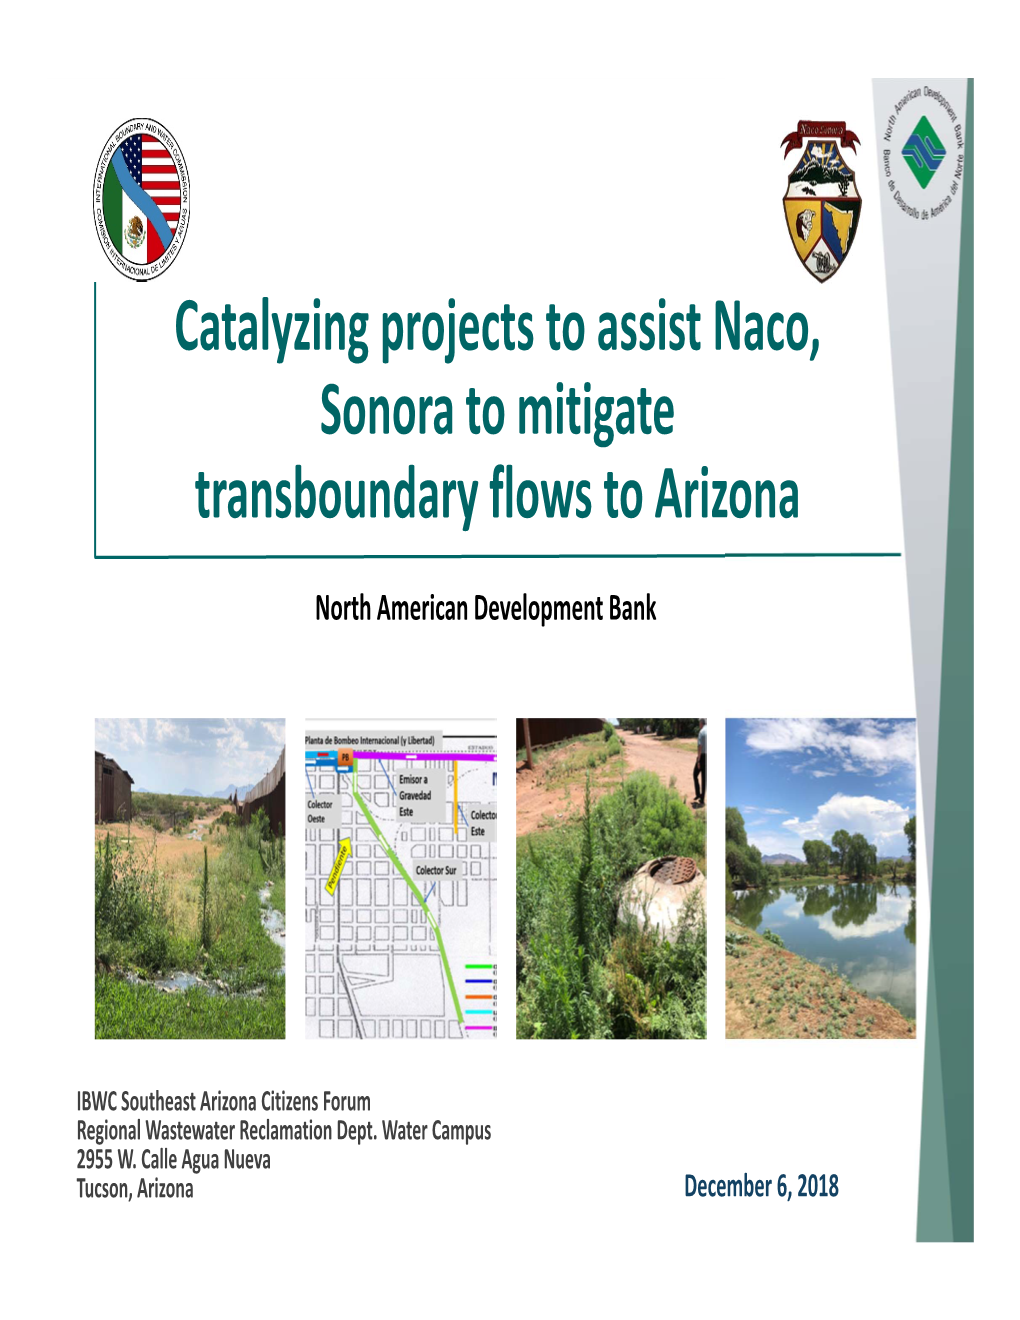 Catalyzing Projects to Assist Naco, Sonora to Mitigate Transboundary Flows to Arizona